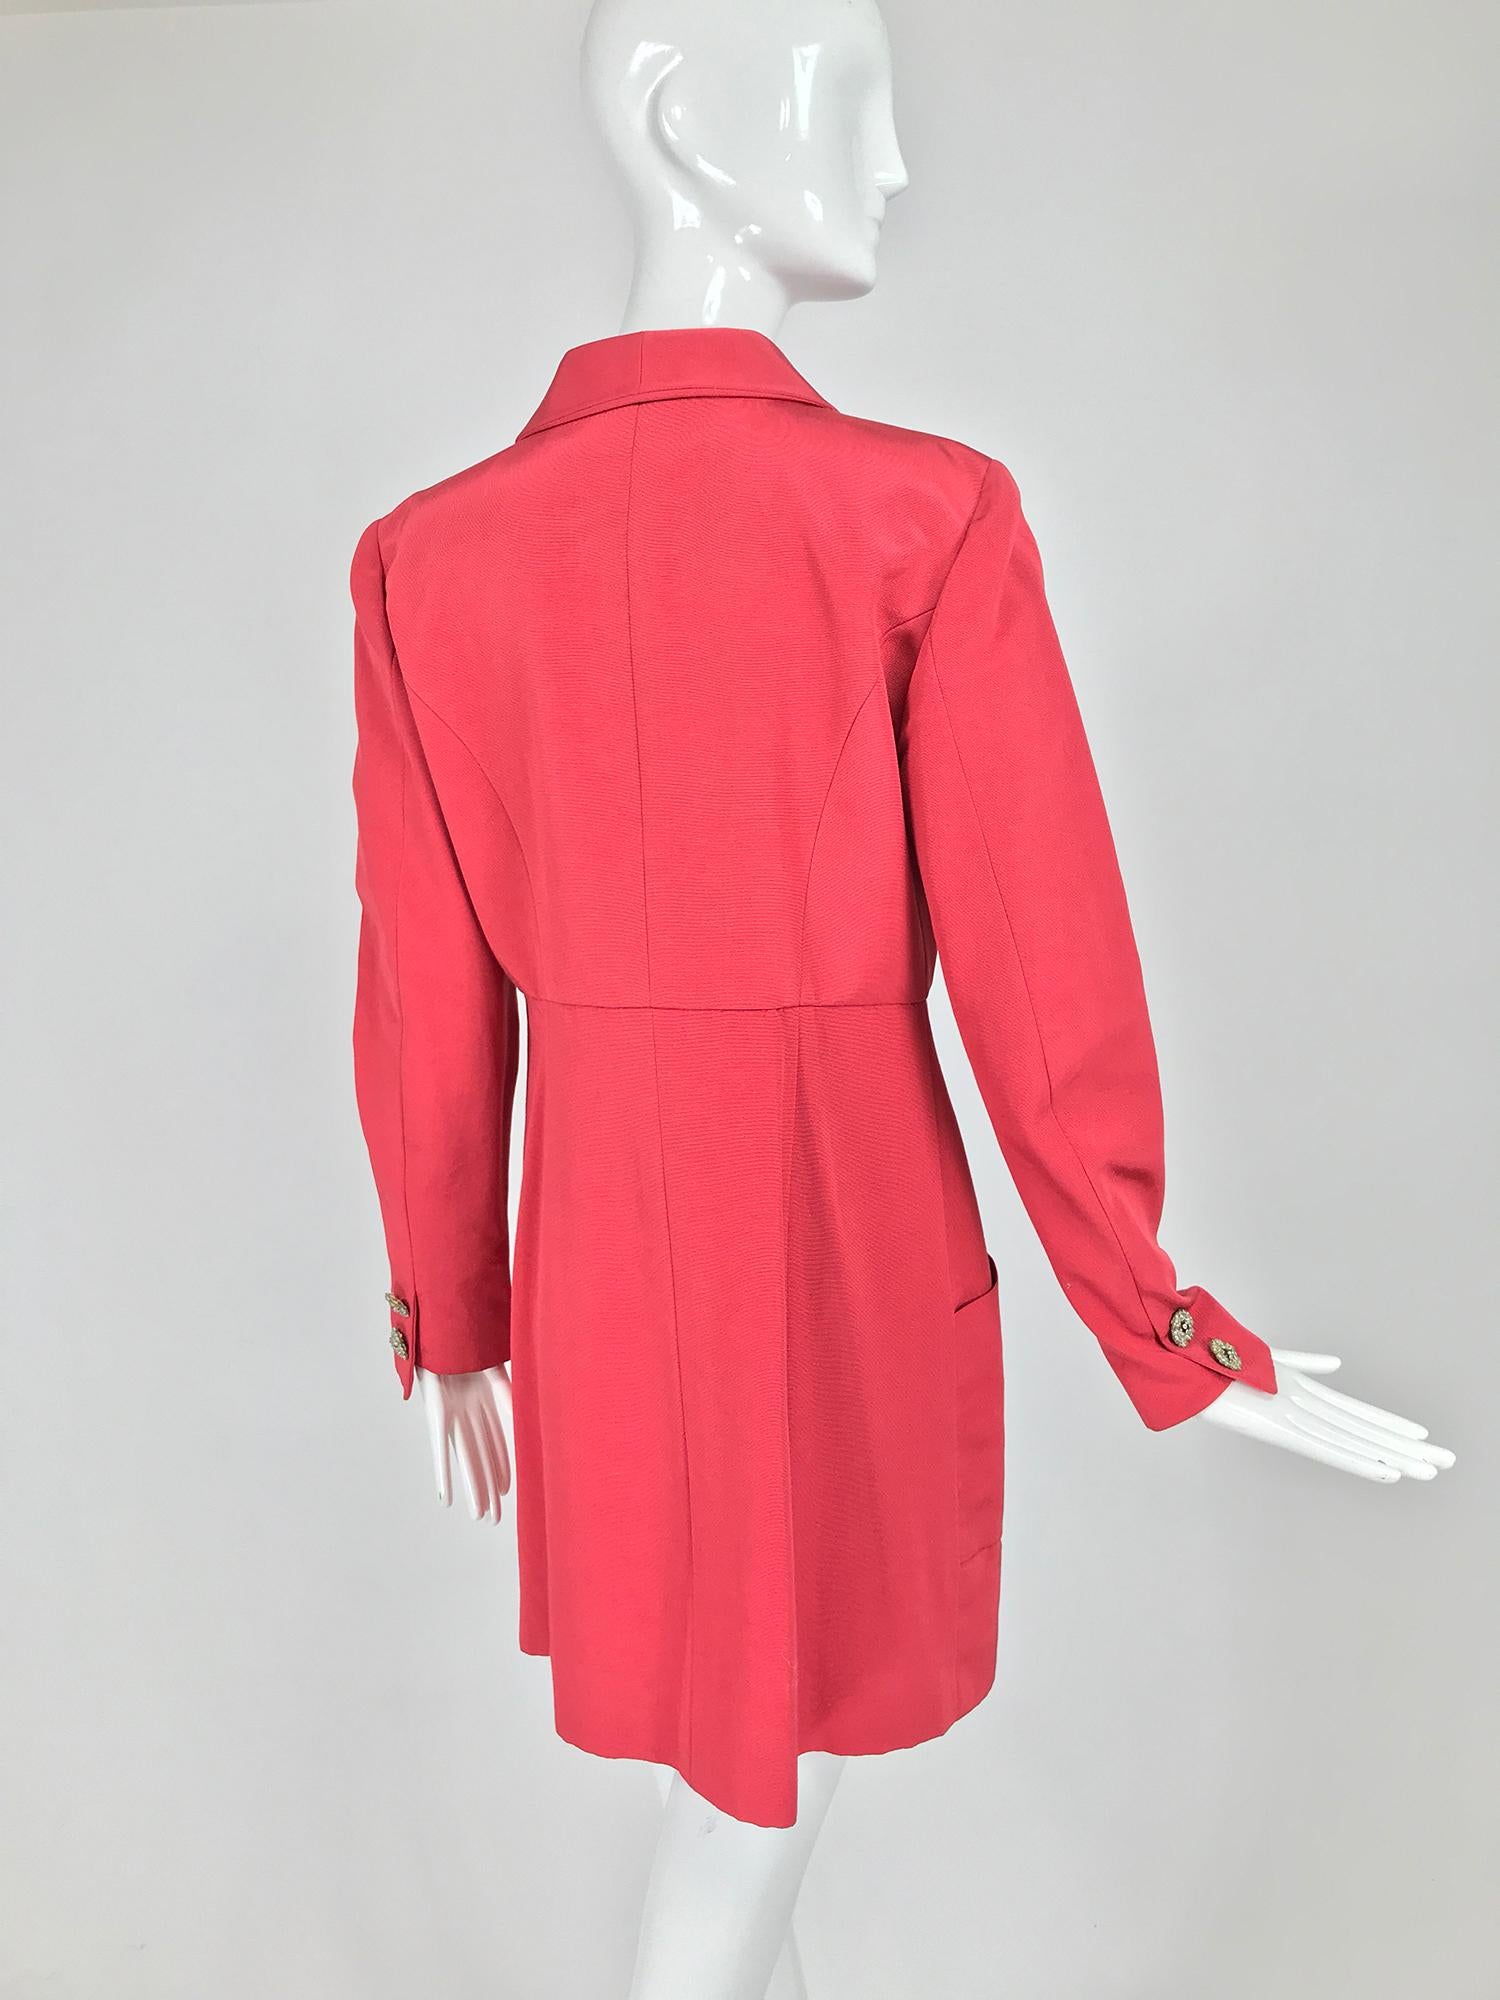 Karl Lagerfeld Coral Red Silk Faille Reddingote Style Coat 1990s In Good Condition In West Palm Beach, FL